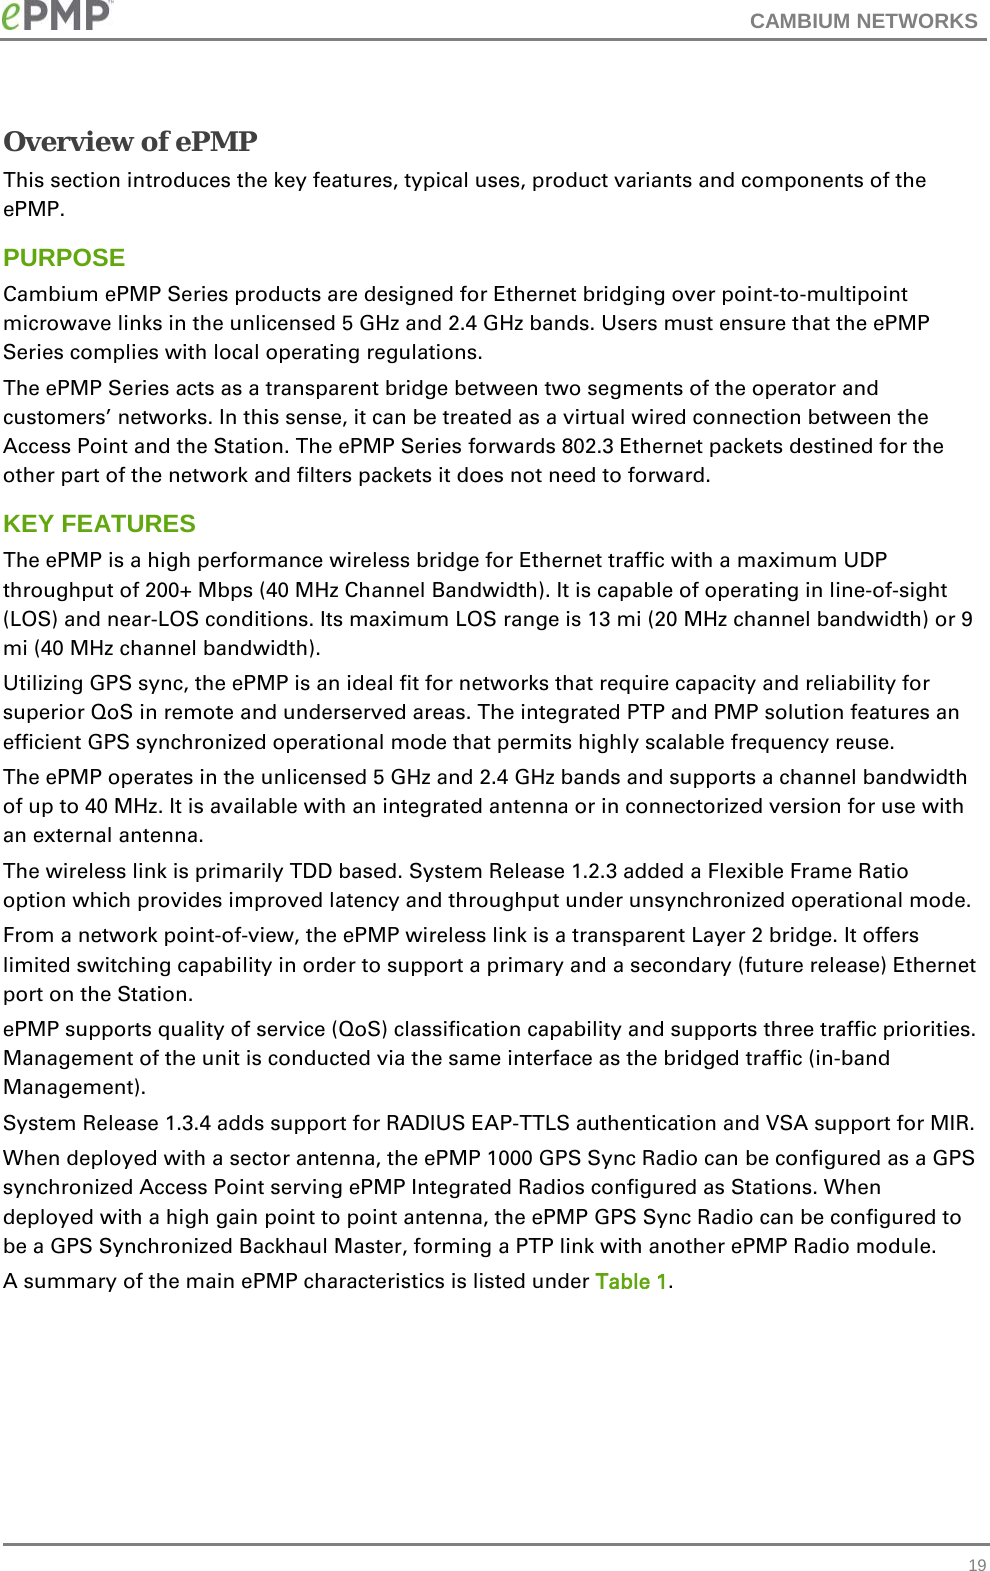 CAMBIUM NETWORKS  Overview of ePMP This section introduces the key features, typical uses, product variants and components of the ePMP. PURPOSE Cambium ePMP Series products are designed for Ethernet bridging over point-to-multipoint microwave links in the unlicensed 5 GHz and 2.4 GHz bands. Users must ensure that the ePMP Series complies with local operating regulations. The ePMP Series acts as a transparent bridge between two segments of the operator and customers’ networks. In this sense, it can be treated as a virtual wired connection between the Access Point and the Station. The ePMP Series forwards 802.3 Ethernet packets destined for the other part of the network and filters packets it does not need to forward.  KEY FEATURES The ePMP is a high performance wireless bridge for Ethernet traffic with a maximum UDP throughput of 200+ Mbps (40 MHz Channel Bandwidth). It is capable of operating in line-of-sight (LOS) and near-LOS conditions. Its maximum LOS range is 13 mi (20 MHz channel bandwidth) or 9 mi (40 MHz channel bandwidth). Utilizing GPS sync, the ePMP is an ideal fit for networks that require capacity and reliability for superior QoS in remote and underserved areas. The integrated PTP and PMP solution features an efficient GPS synchronized operational mode that permits highly scalable frequency reuse. The ePMP operates in the unlicensed 5 GHz and 2.4 GHz bands and supports a channel bandwidth of up to 40 MHz. It is available with an integrated antenna or in connectorized version for use with an external antenna. The wireless link is primarily TDD based. System Release 1.2.3 added a Flexible Frame Ratio option which provides improved latency and throughput under unsynchronized operational mode.  From a network point-of-view, the ePMP wireless link is a transparent Layer 2 bridge. It offers limited switching capability in order to support a primary and a secondary (future release) Ethernet port on the Station. ePMP supports quality of service (QoS) classification capability and supports three traffic priorities. Management of the unit is conducted via the same interface as the bridged traffic (in-band Management). System Release 1.3.4 adds support for RADIUS EAP-TTLS authentication and VSA support for MIR.  When deployed with a sector antenna, the ePMP 1000 GPS Sync Radio can be configured as a GPS synchronized Access Point serving ePMP Integrated Radios configured as Stations. When deployed with a high gain point to point antenna, the ePMP GPS Sync Radio can be configured to be a GPS Synchronized Backhaul Master, forming a PTP link with another ePMP Radio module. A summary of the main ePMP characteristics is listed under Table 1.  19 